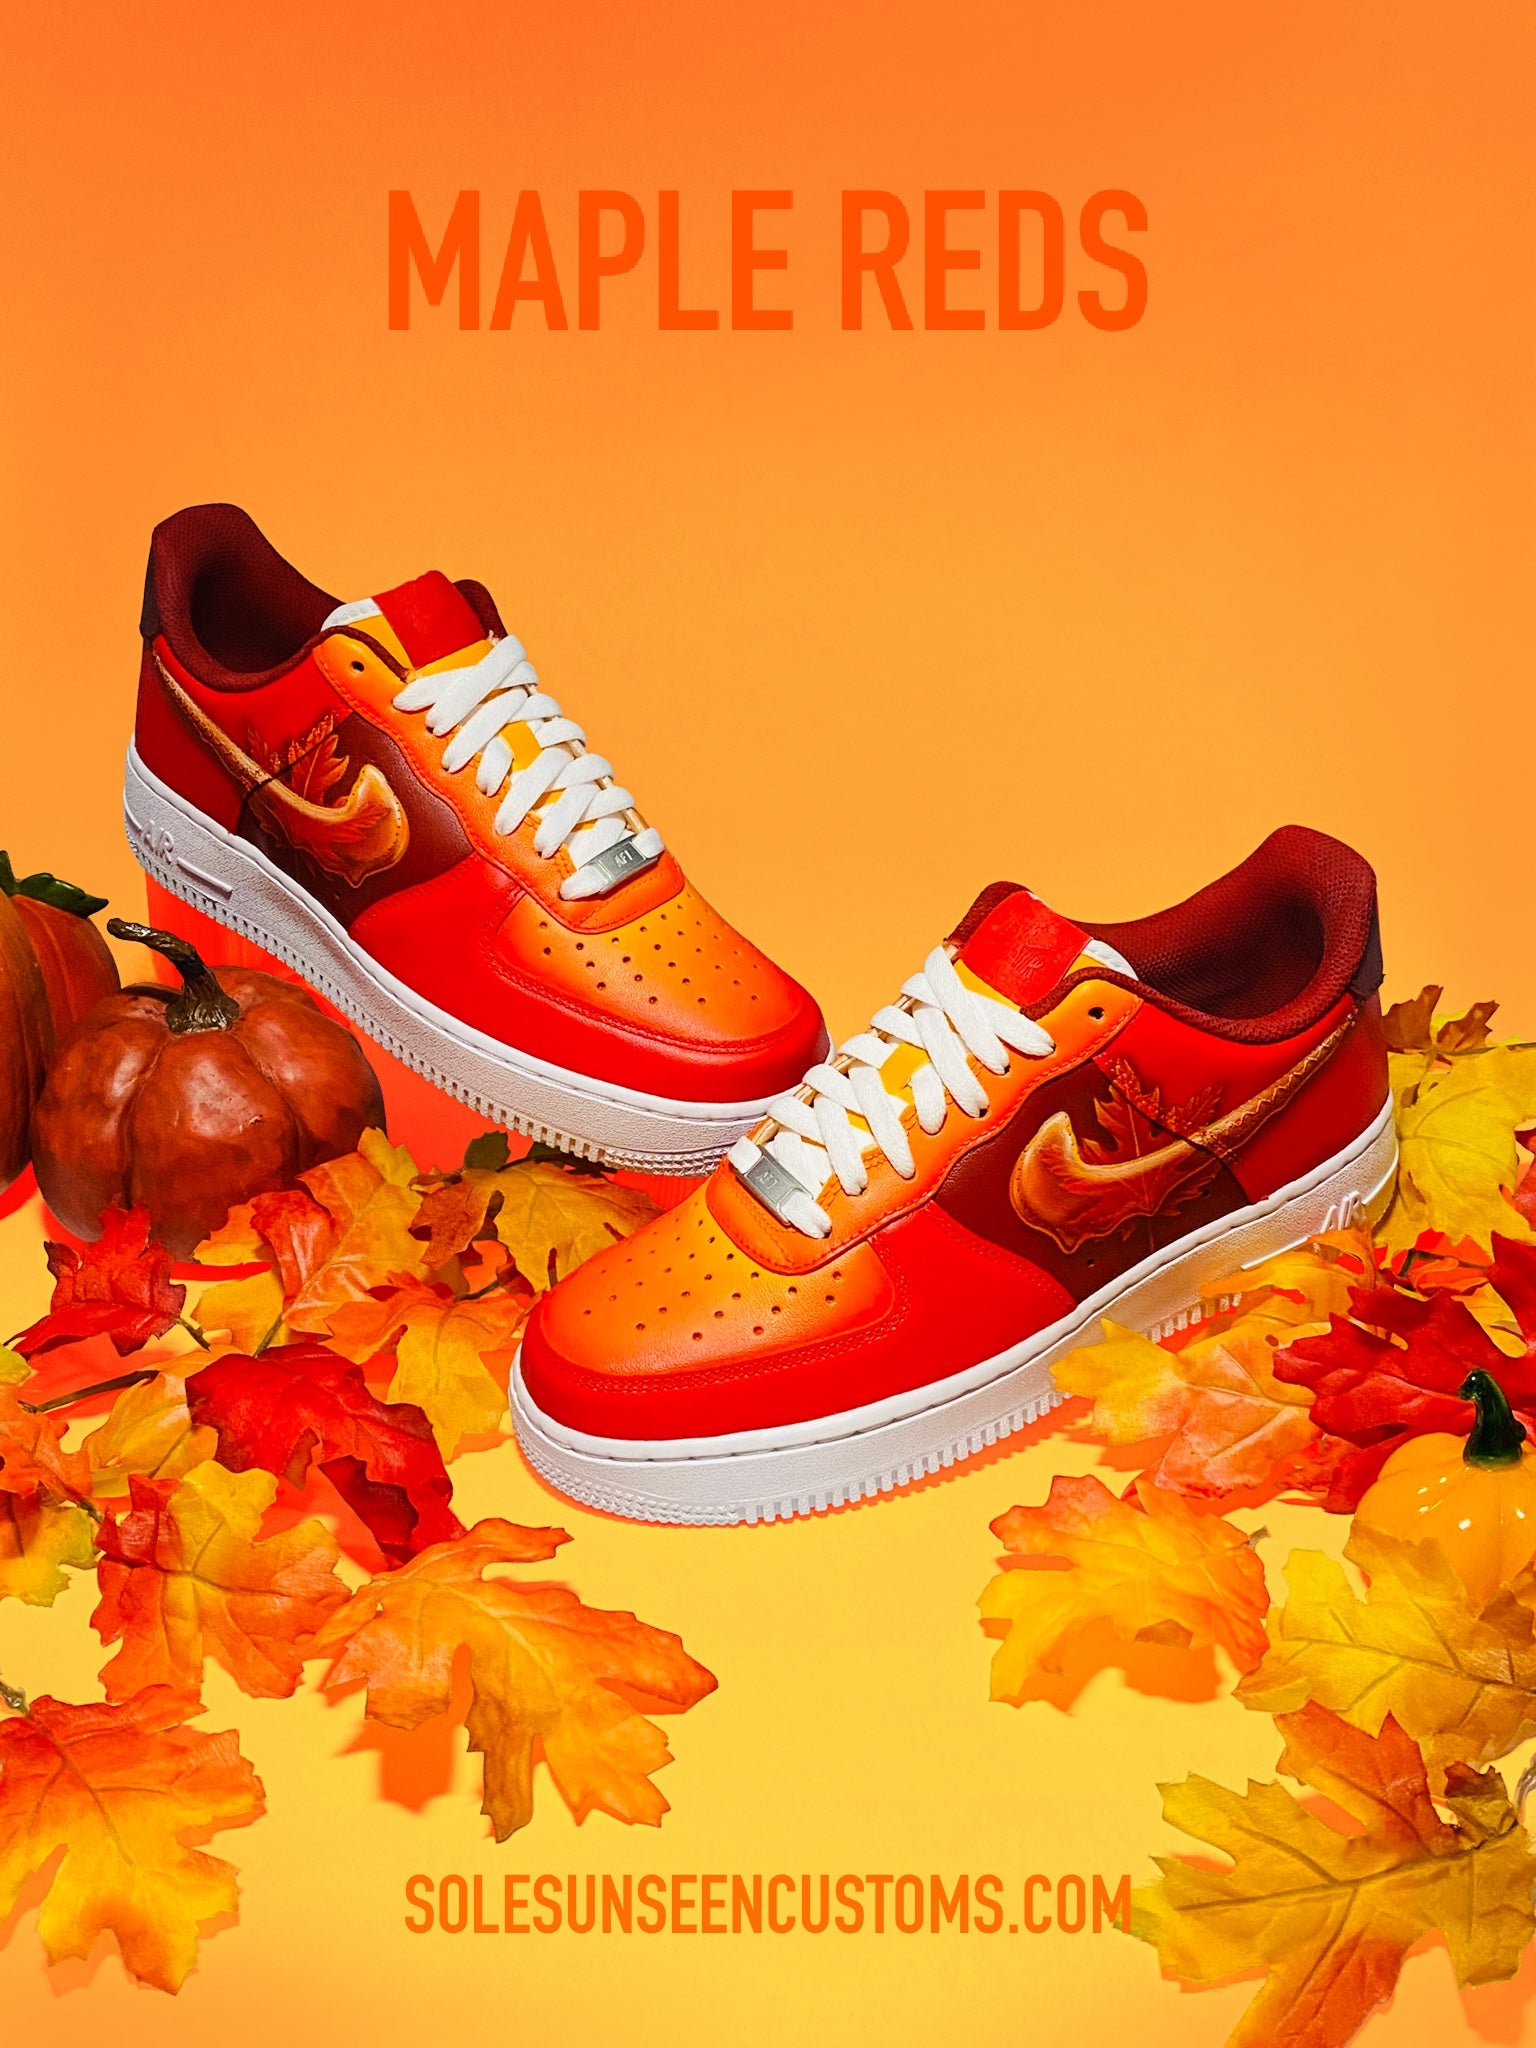 "Maple Reds" custom painted red, orange, and yellow fall shoes.